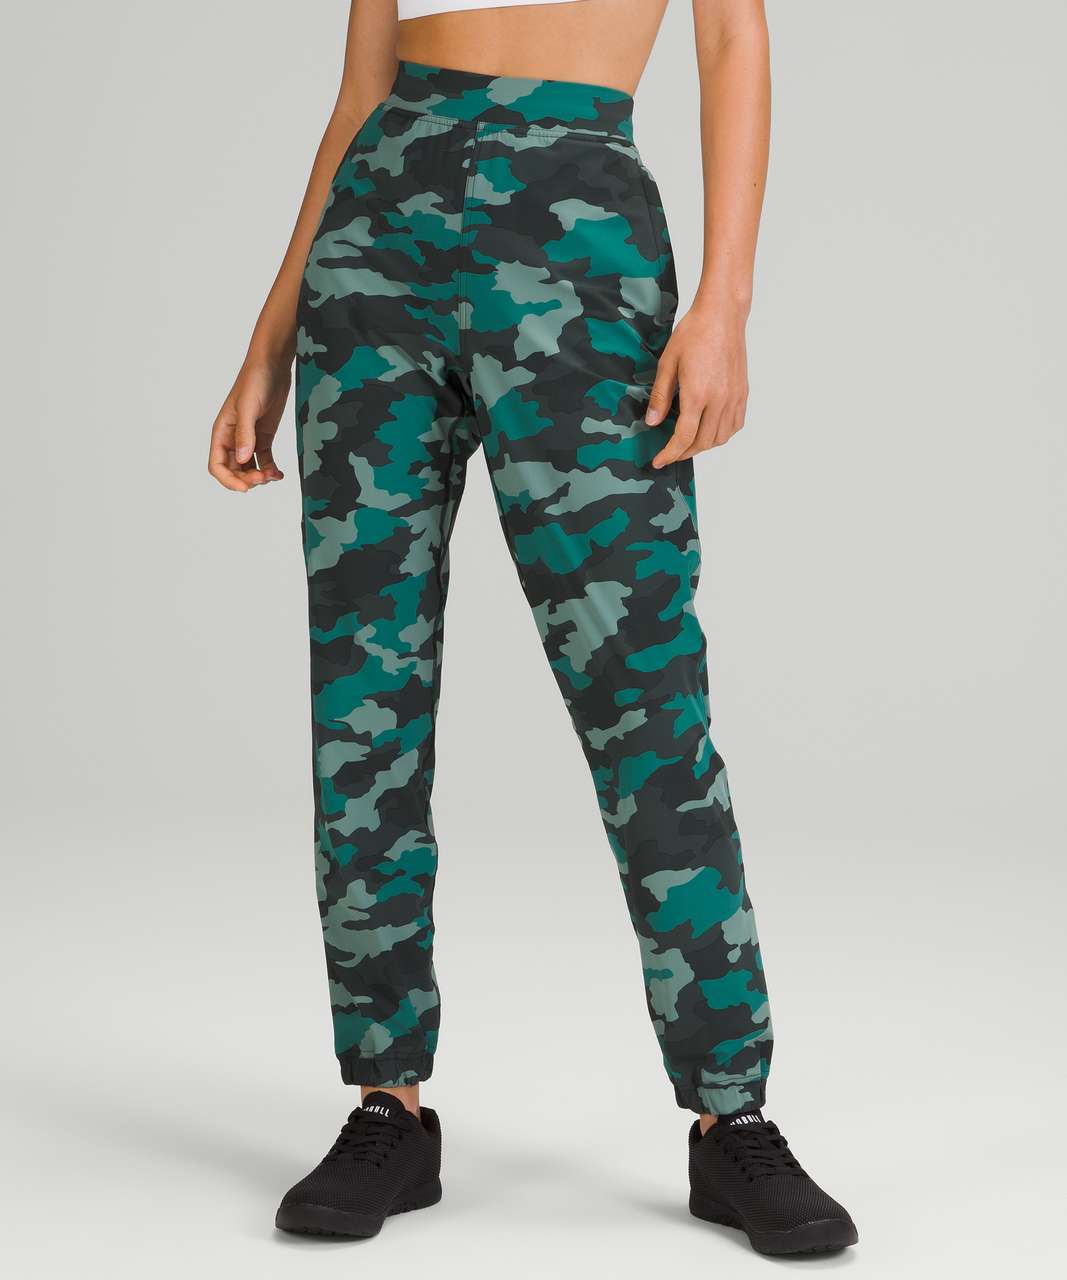 Lululemon Adapted State High-Rise Jogger *28" - Heritage 365 Camo Tidewater Teal Multi